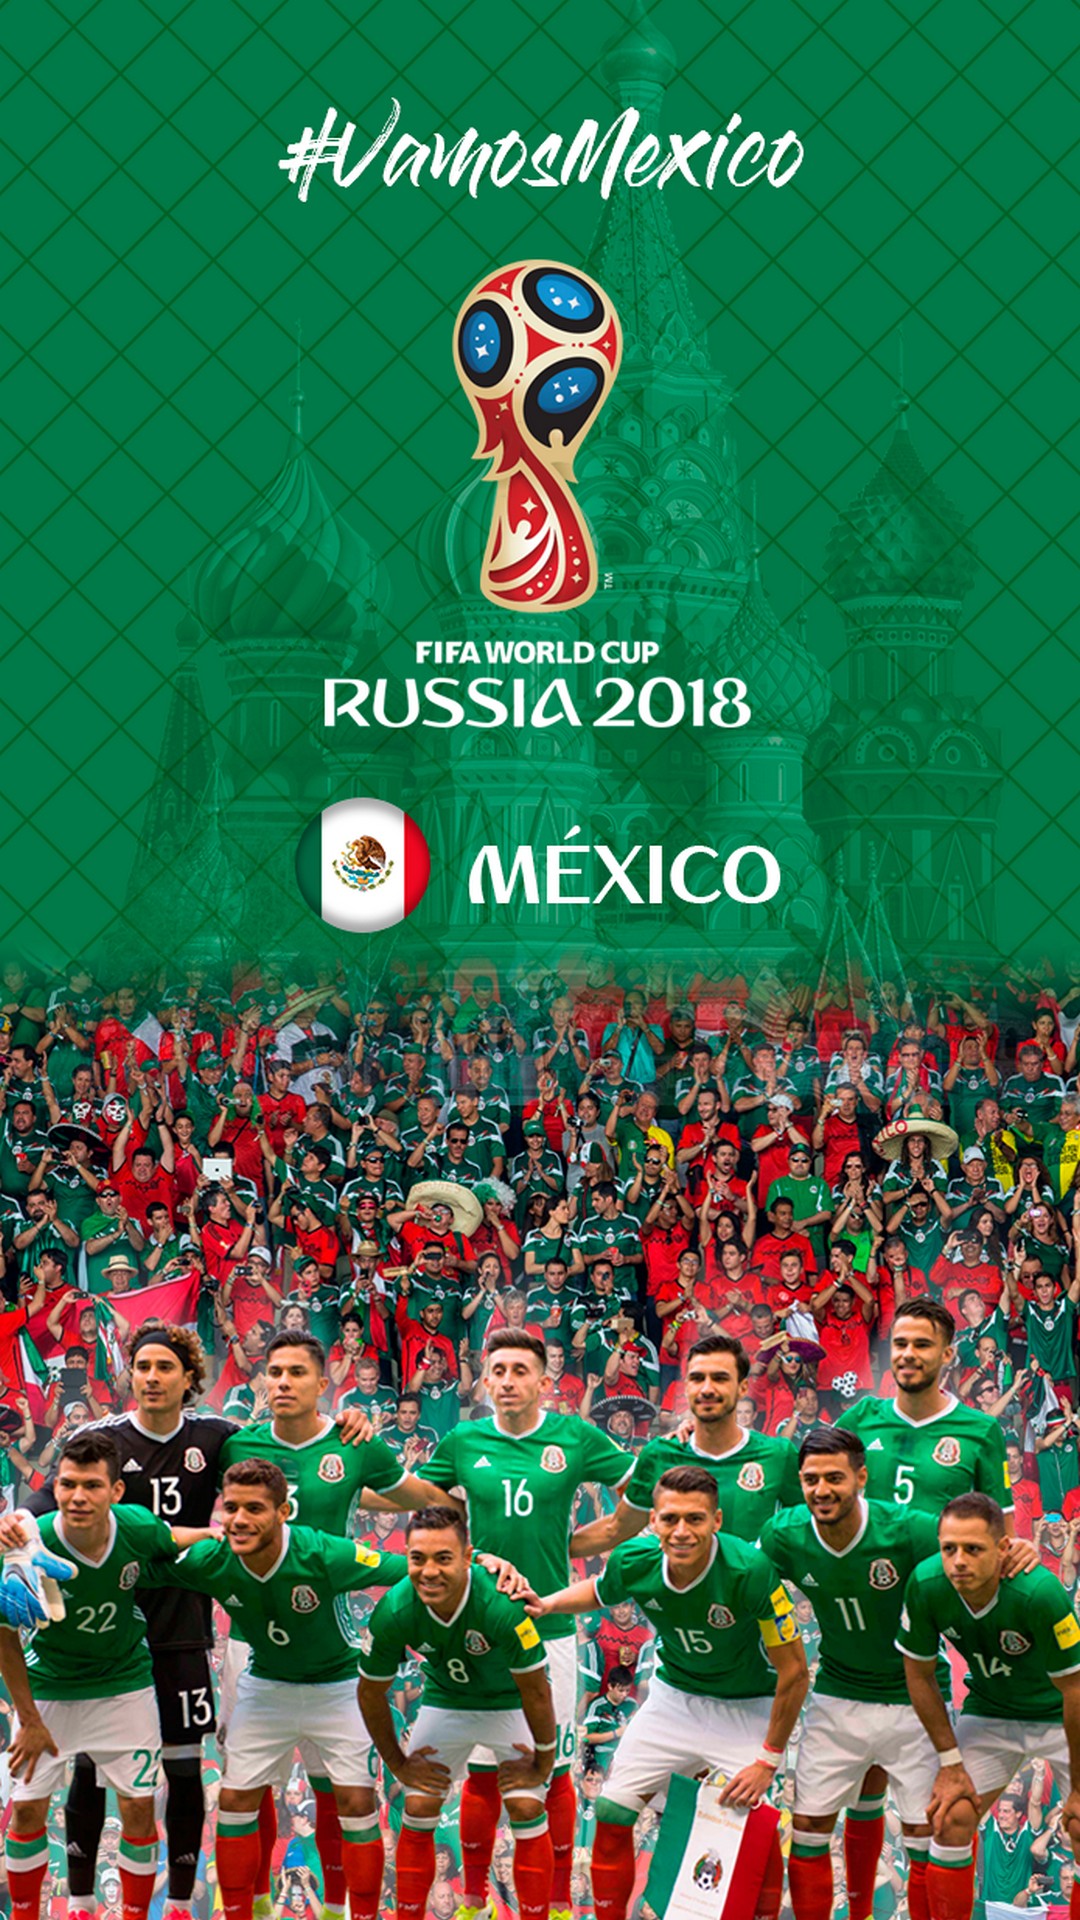 Mexico National Team HD Wallpaper For iPhone With Resolution 1080X1920 pixel. You can make this wallpaper for your Mac or Windows Desktop Background, iPhone, Android or Tablet and another Smartphone device for free